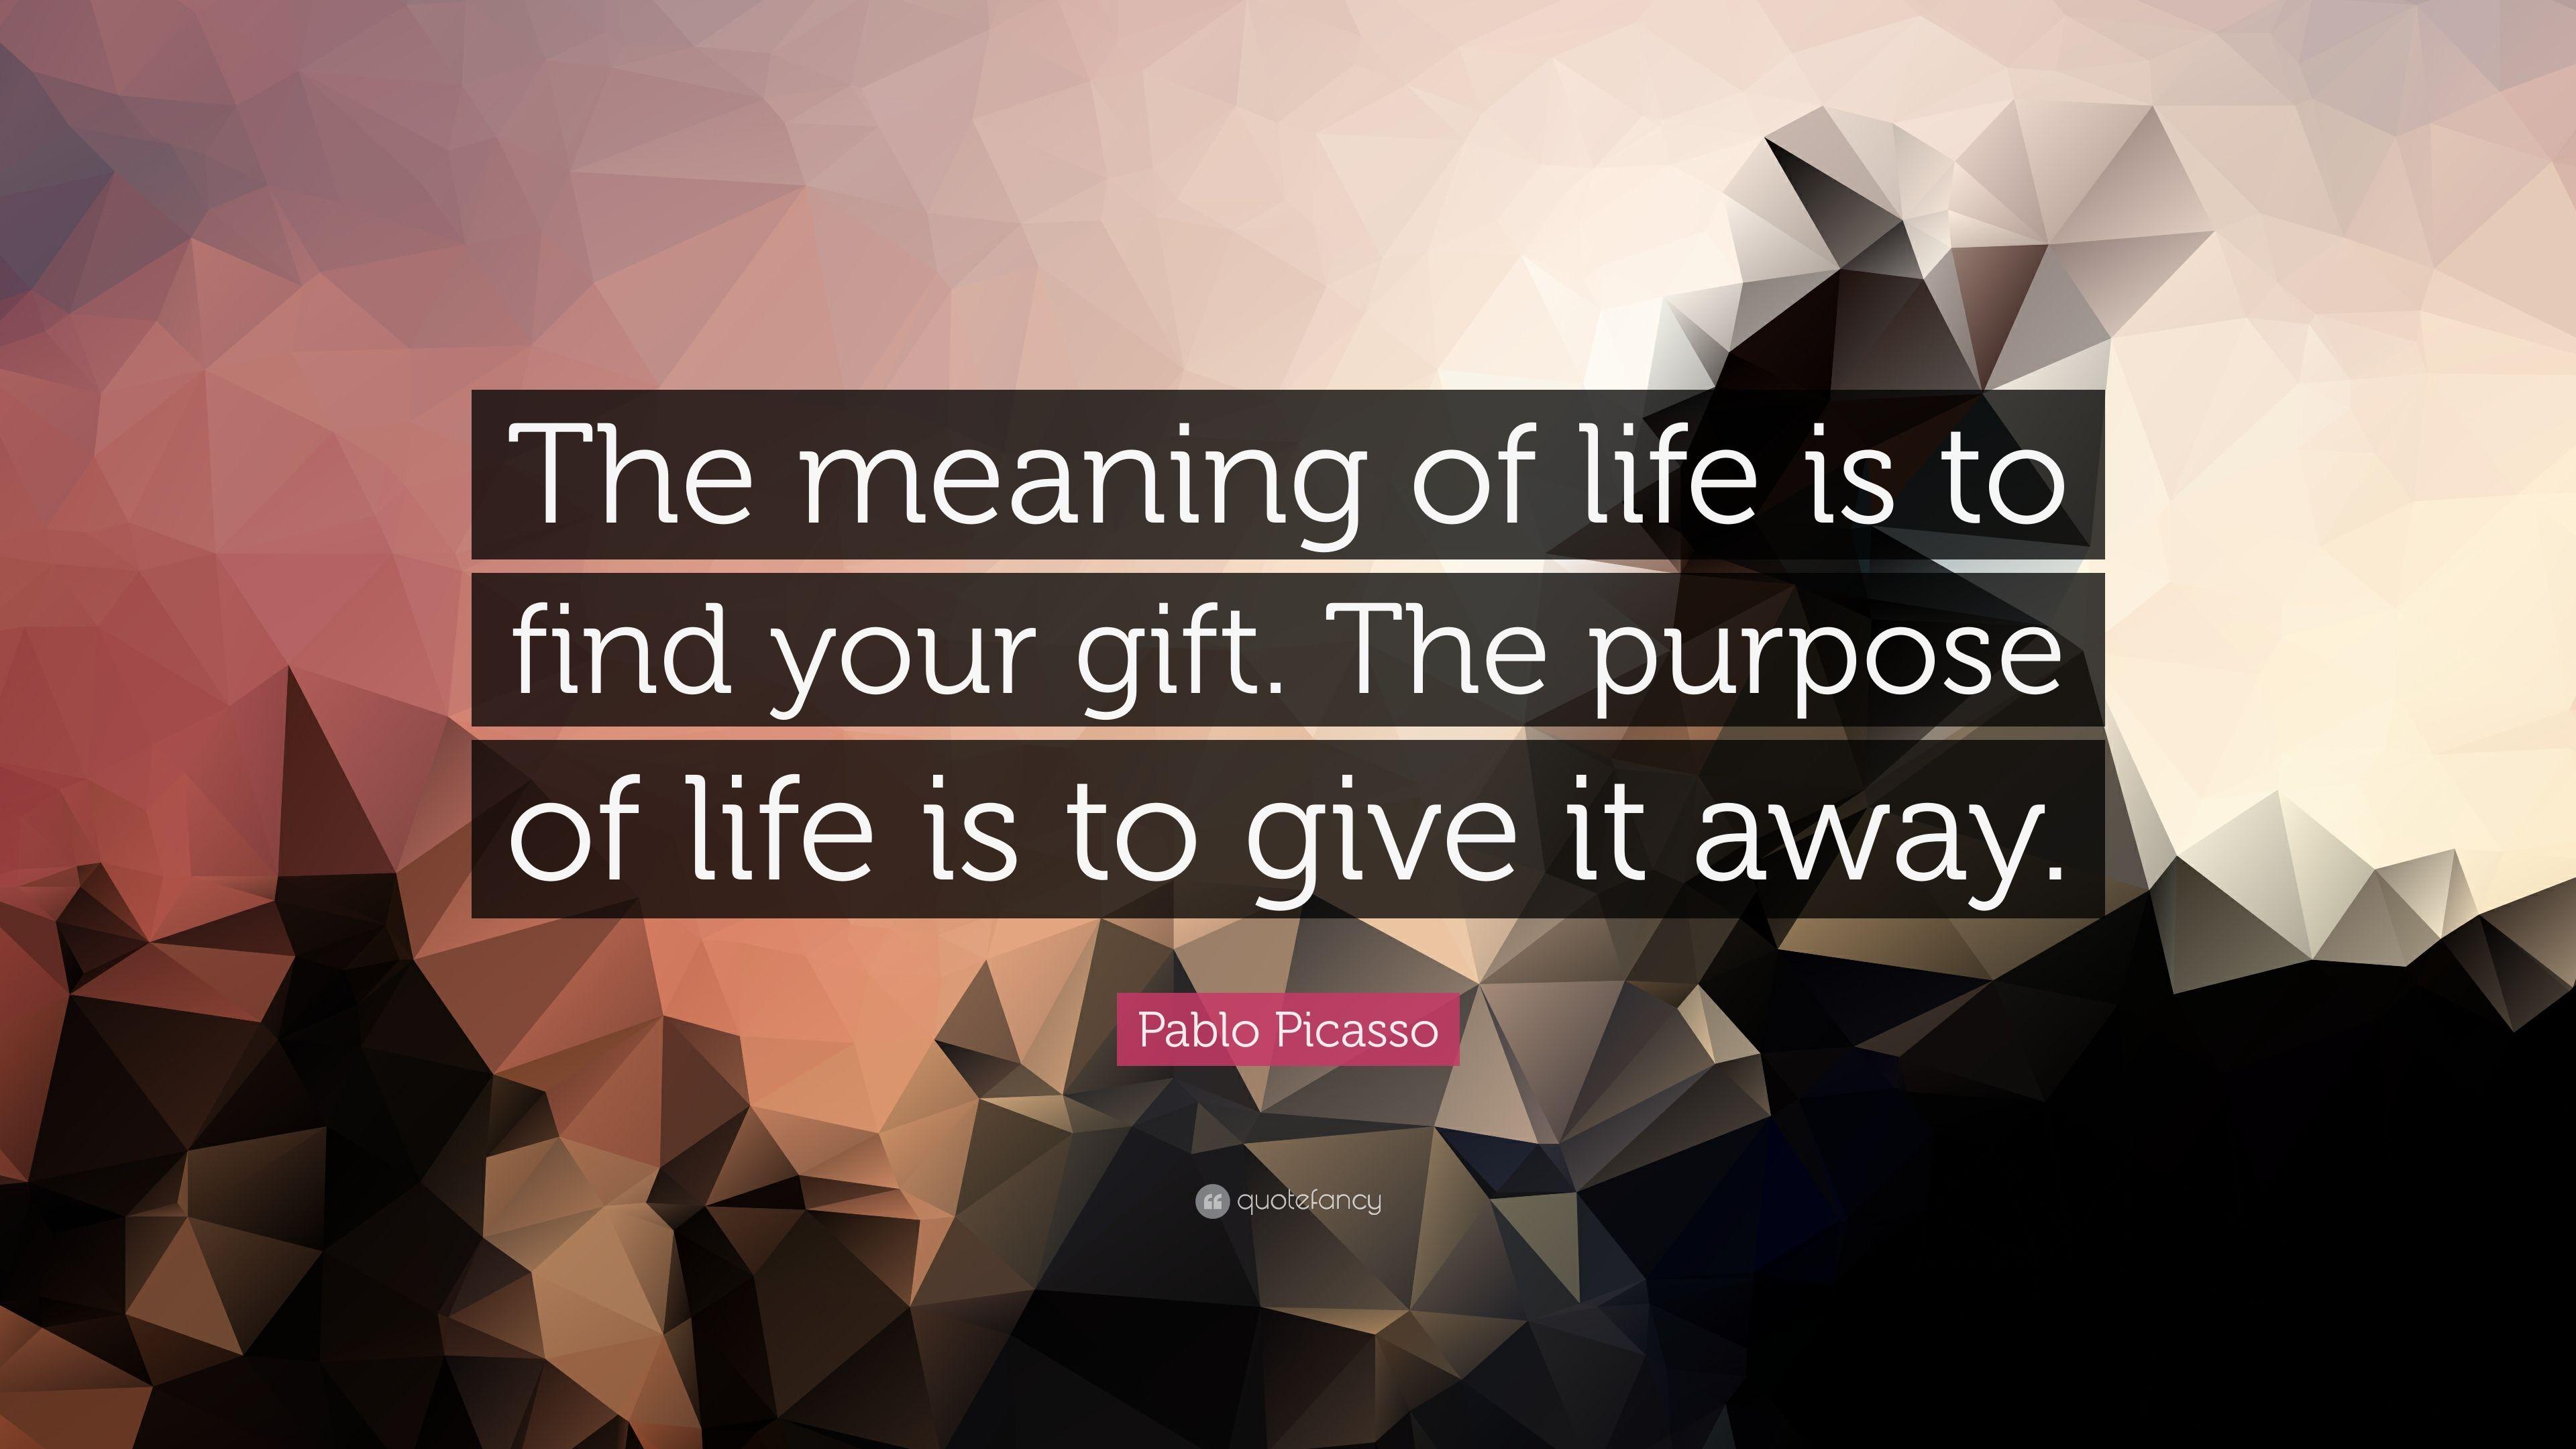 Pablo Picasso Quote: “The meaning of life is to find your gift